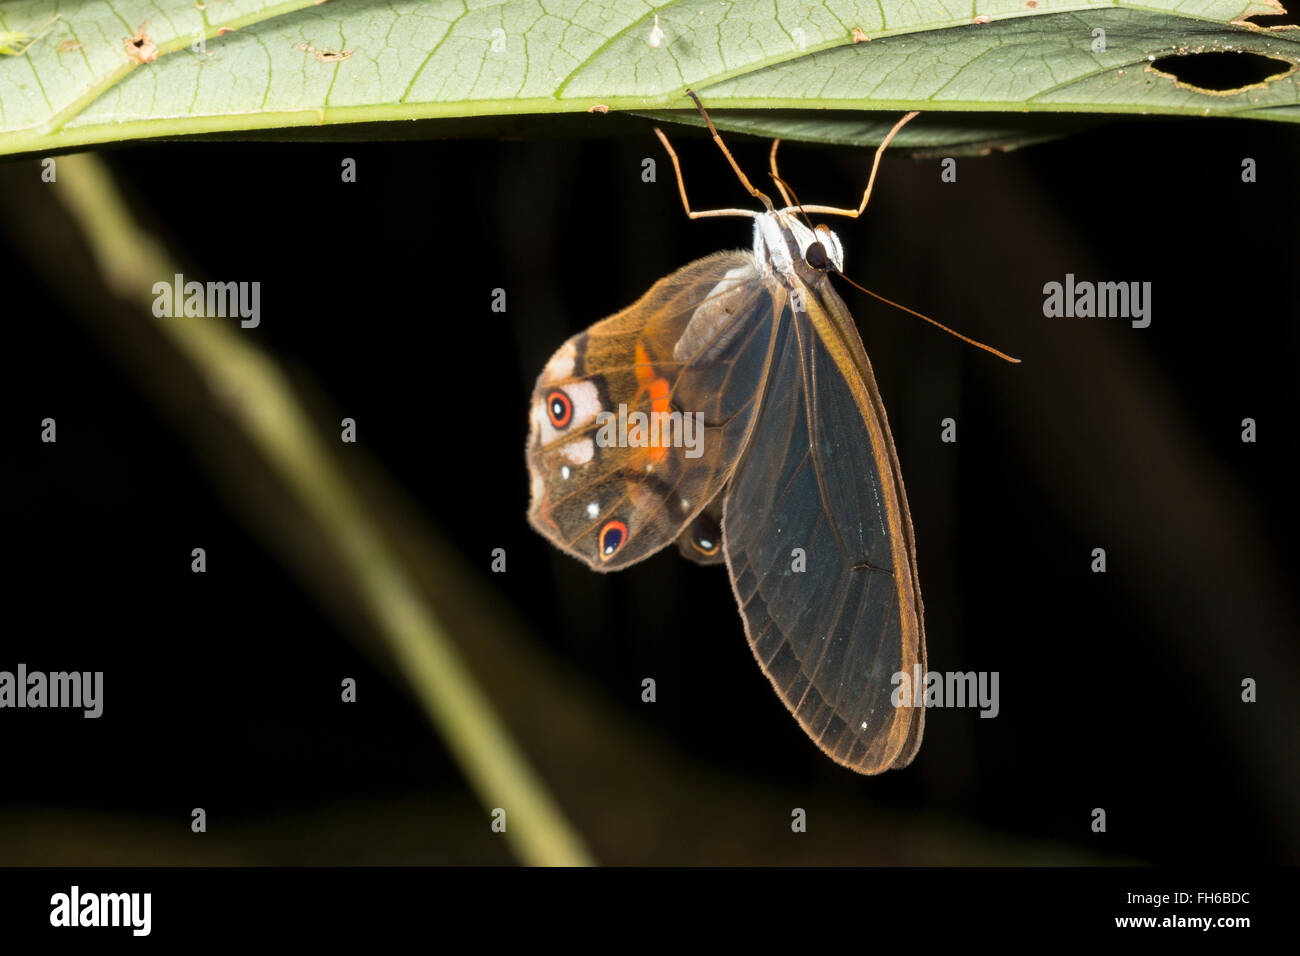 Clearwing butterfly (Haetera piera) Family Satyridae roosting on a leaf at night in the rainforest understory, Pastaza, Ecuador Stock Photo